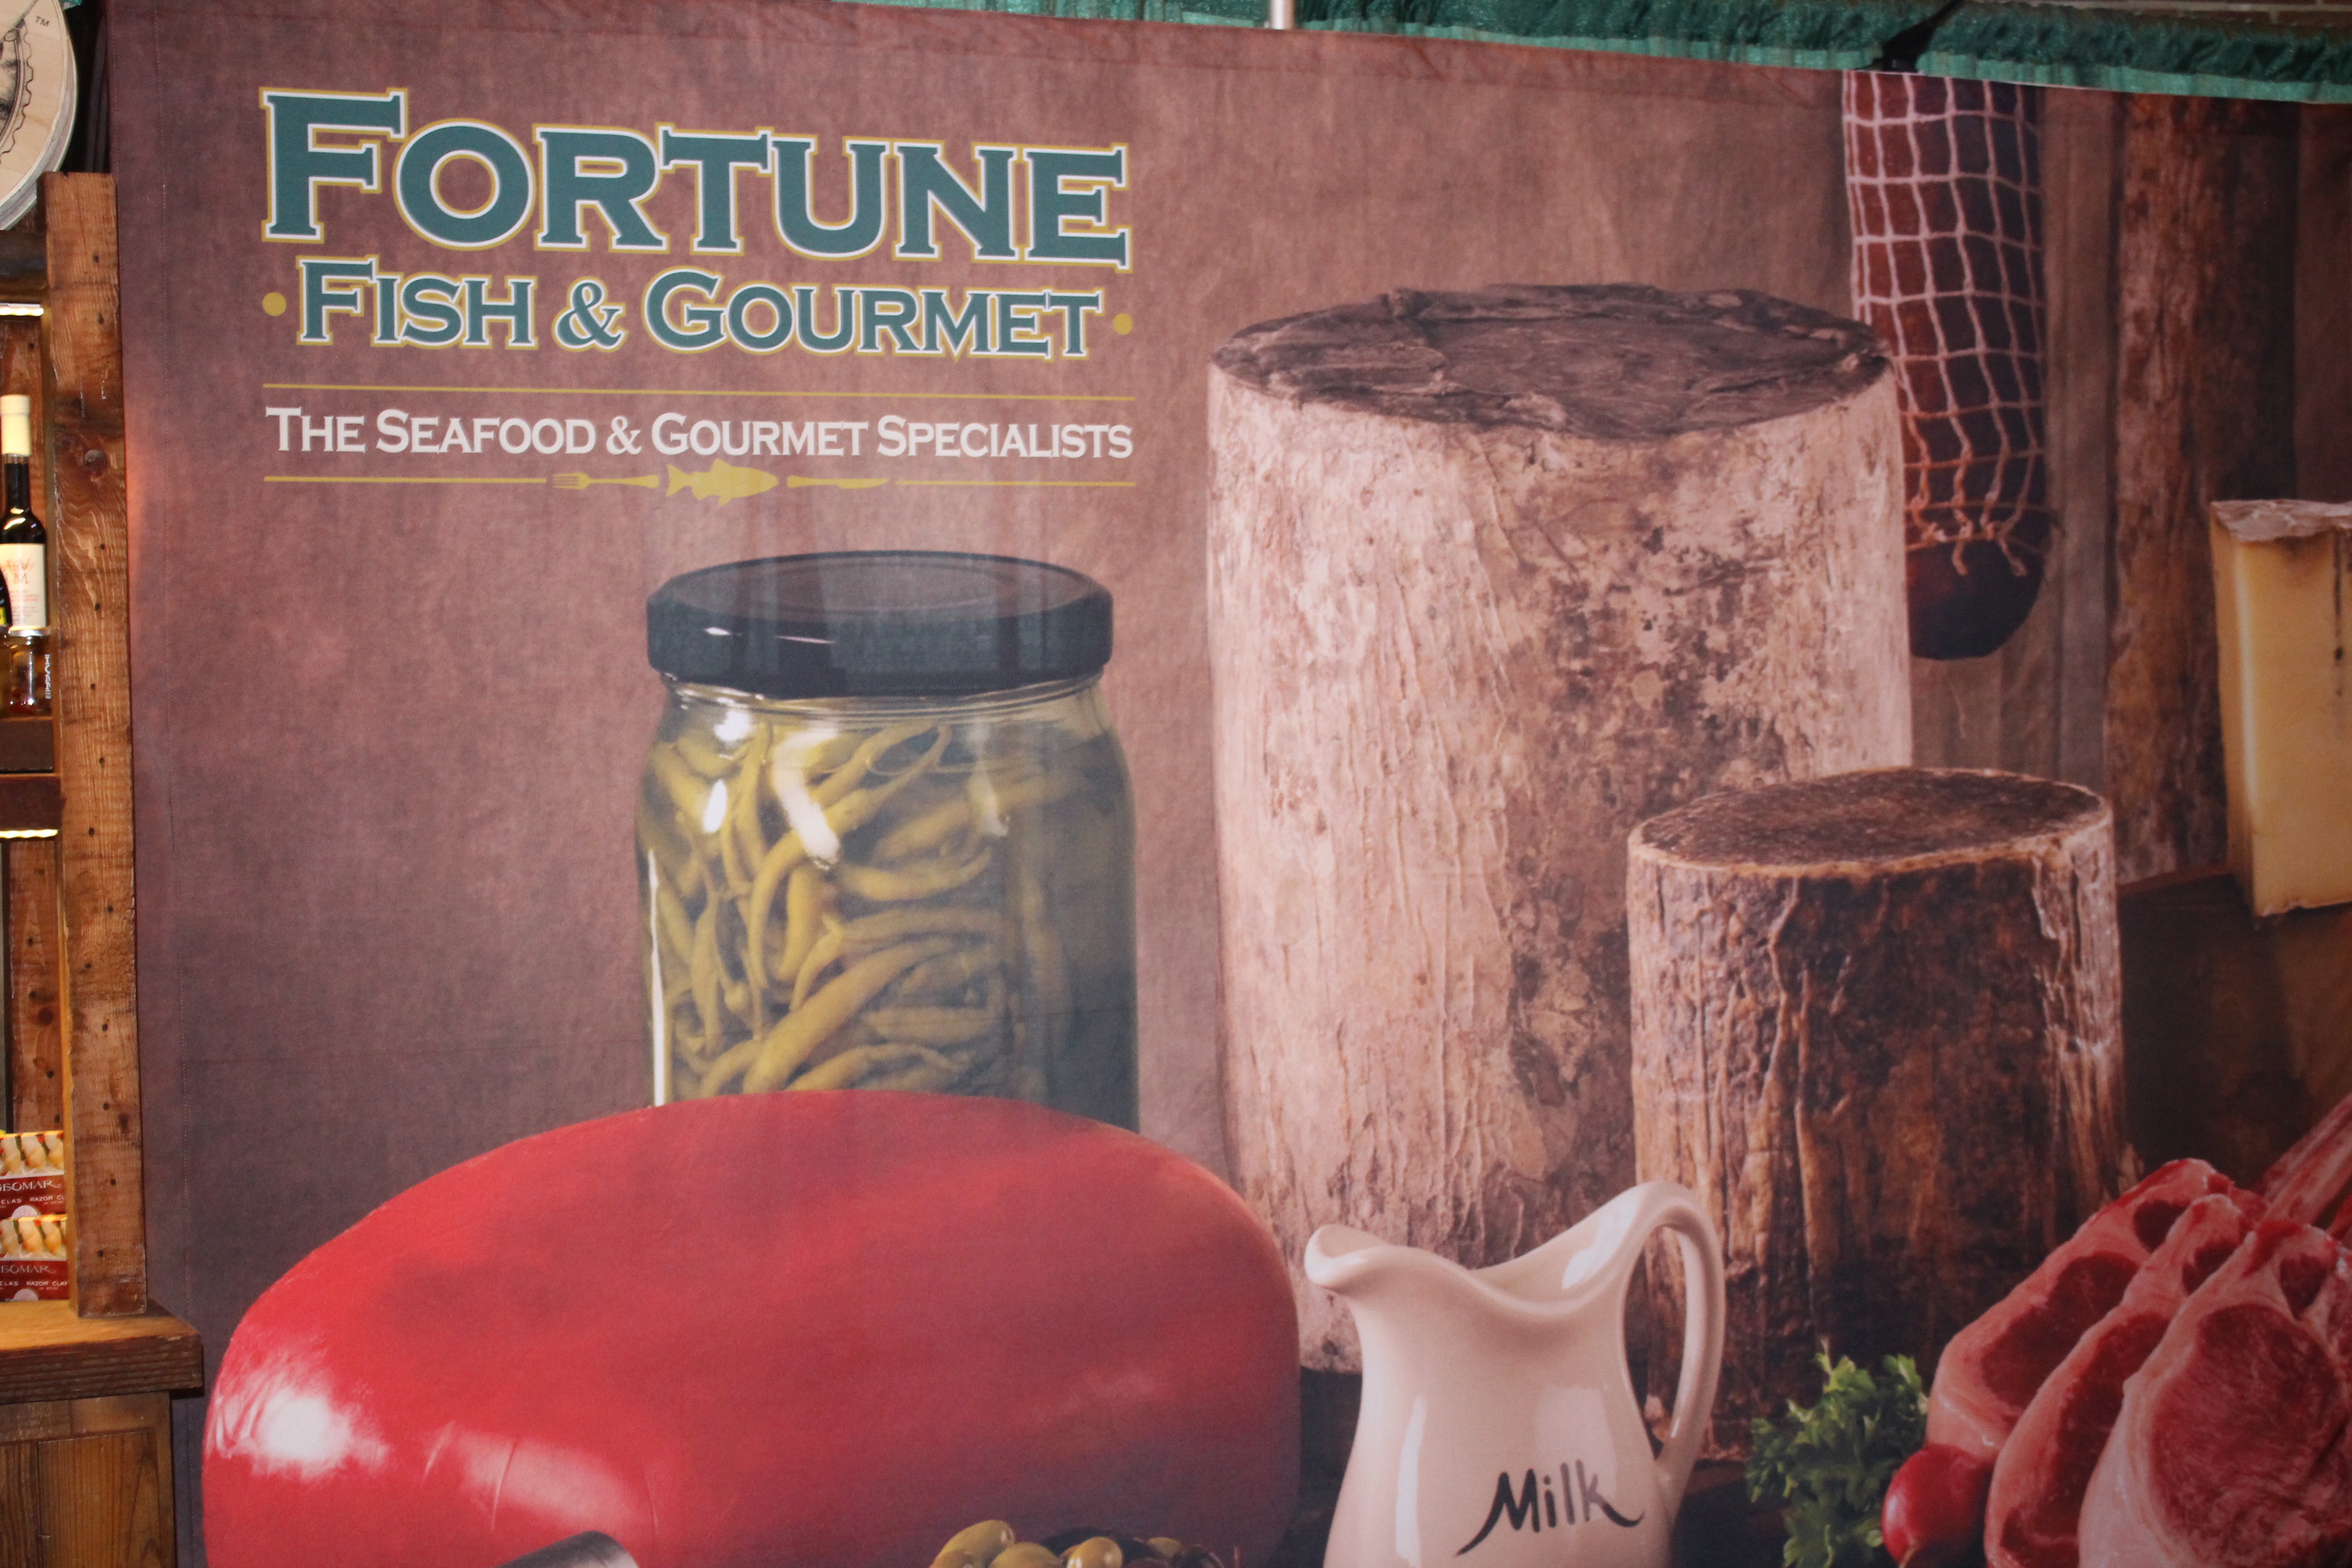 Fortune Fish & Gourmet Chicago Seafood and Specialty Show 2014 – Felt Like  a Foodie